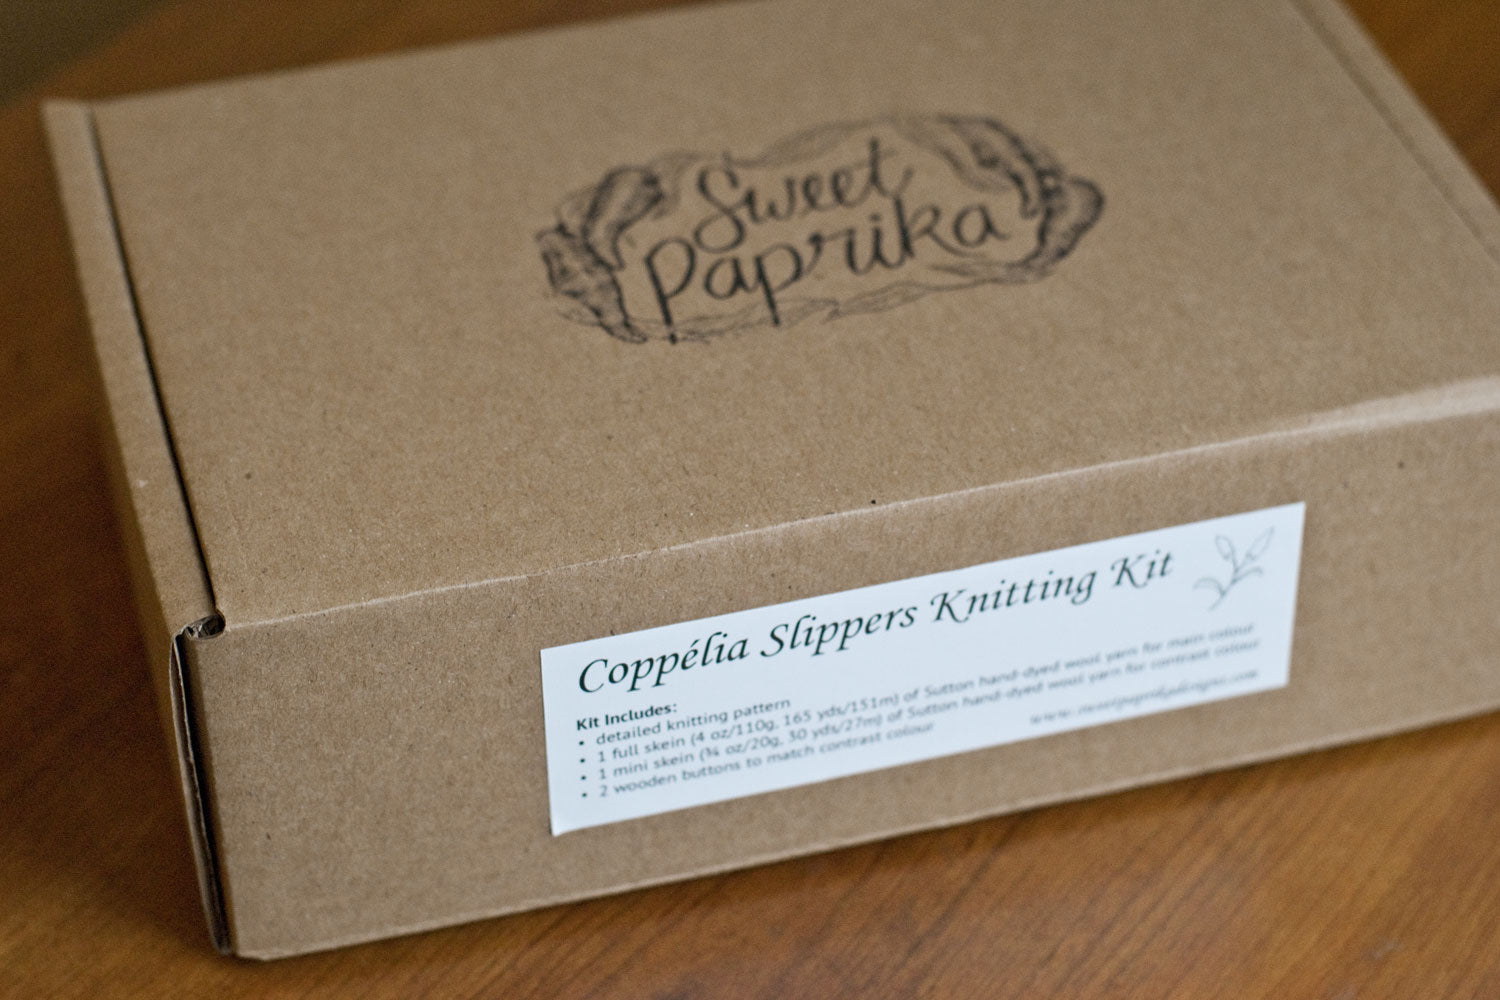 Cardboard box with sweet paprika stamp on top and slipper kit label on the side